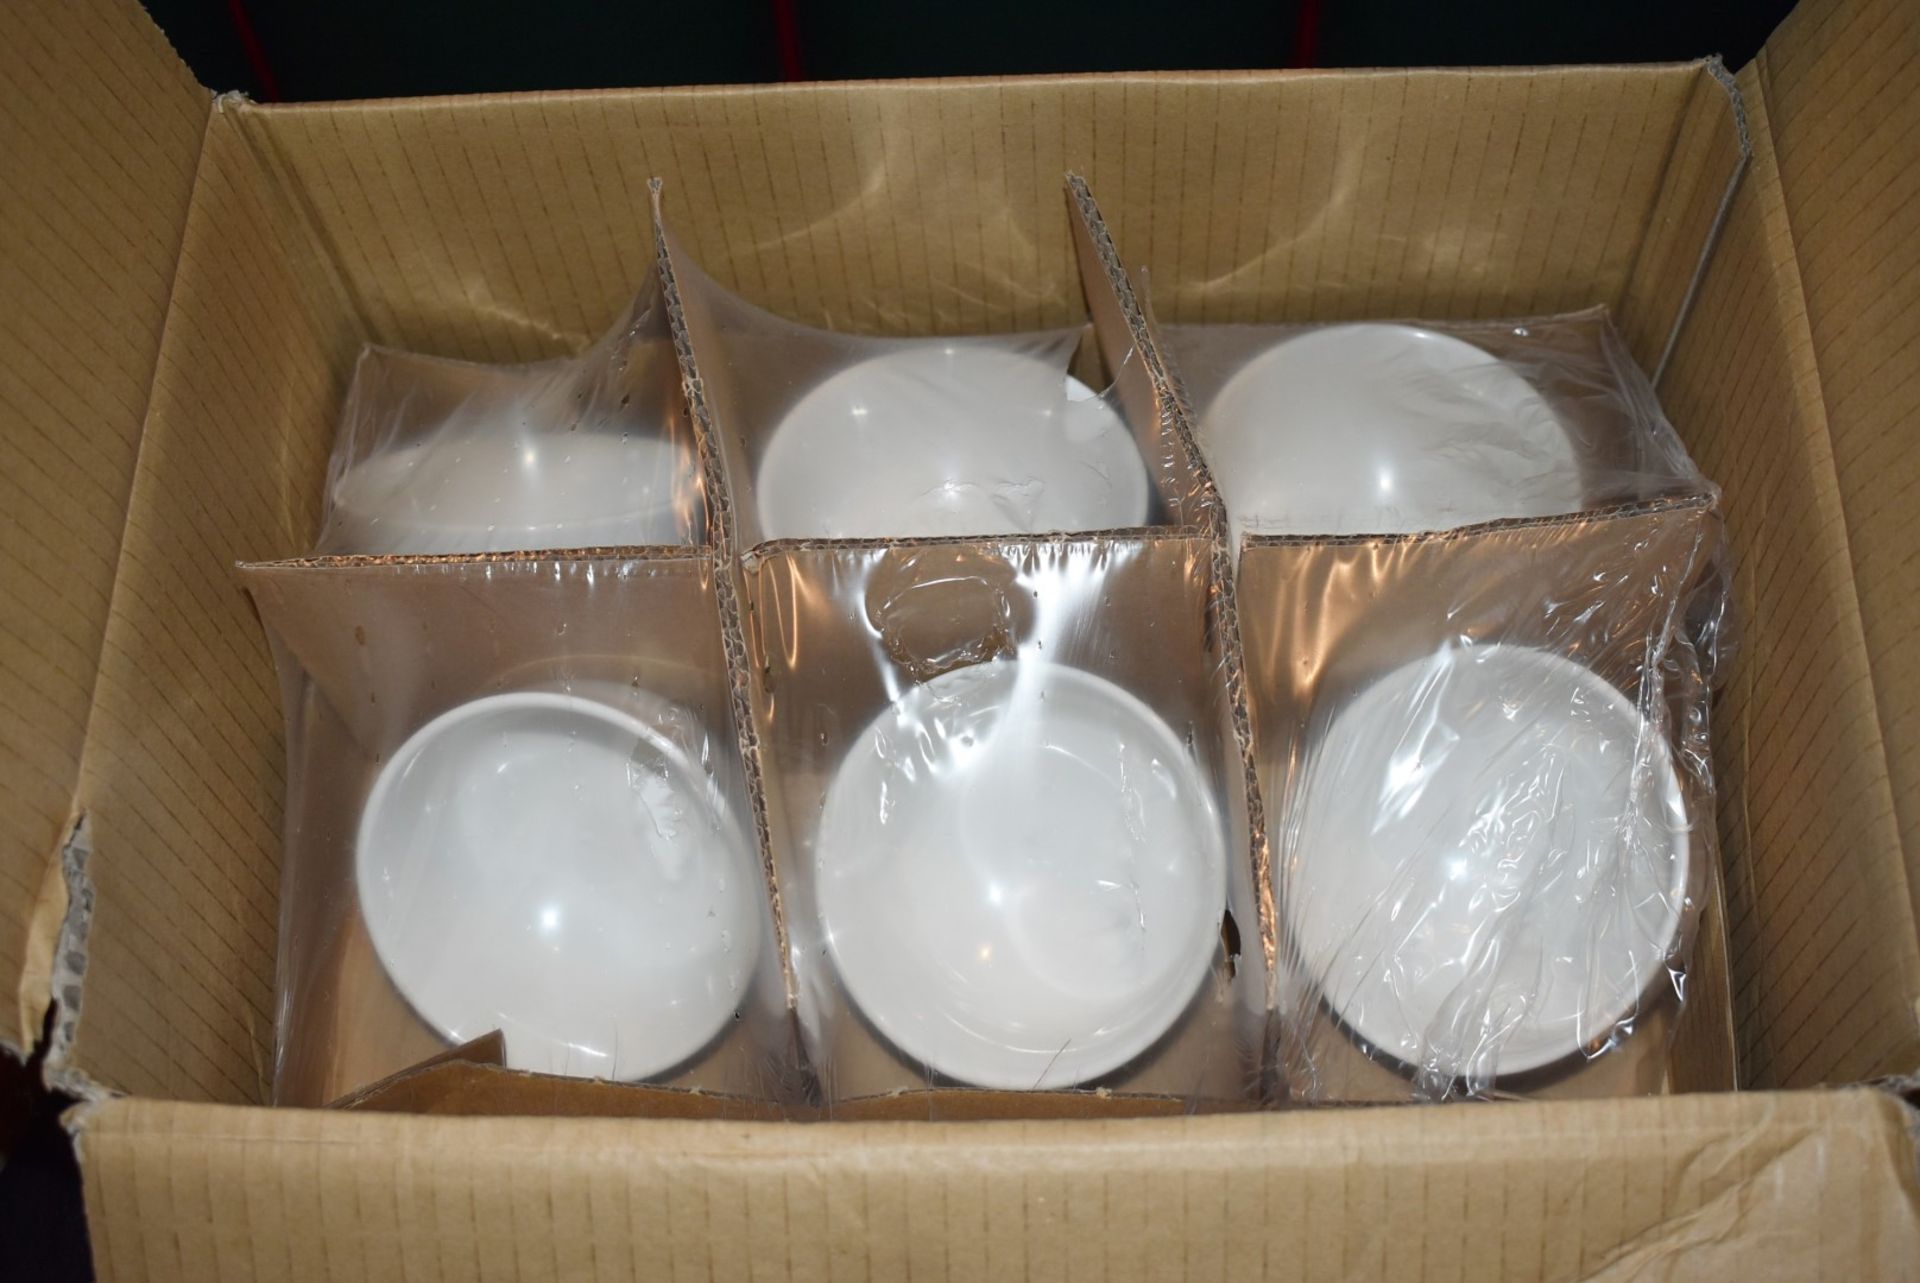 12 x Performance Simplicity White 8oz Sugar Bowls - New and Boxed